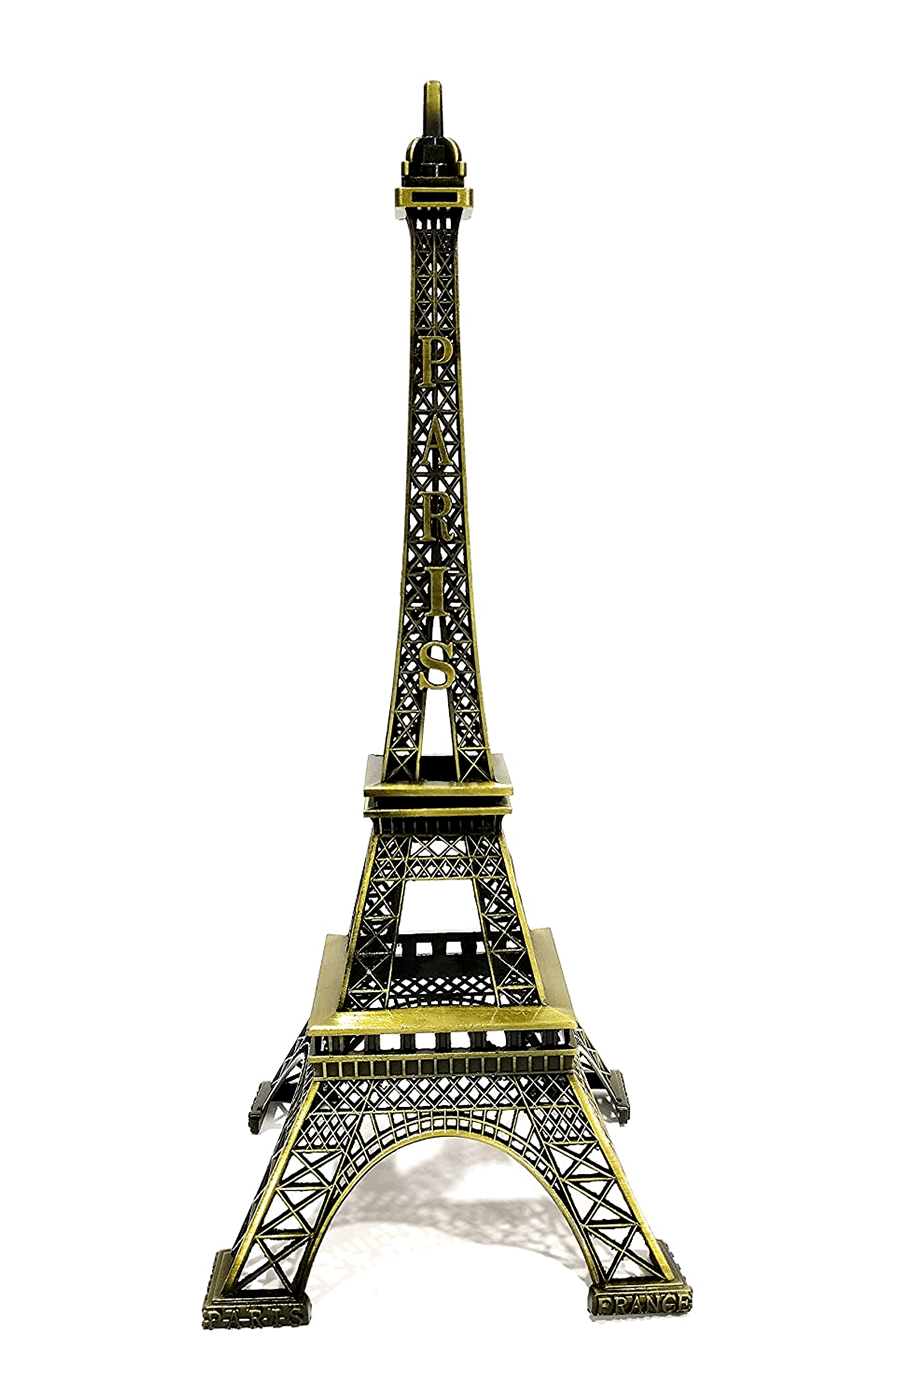 FunkyTradition Combo Set of 3 Eiffel Tower Statue Metal Showpiece | Birthday Anniversary Gift and Home Office Decor 9",6" and 5" Tall